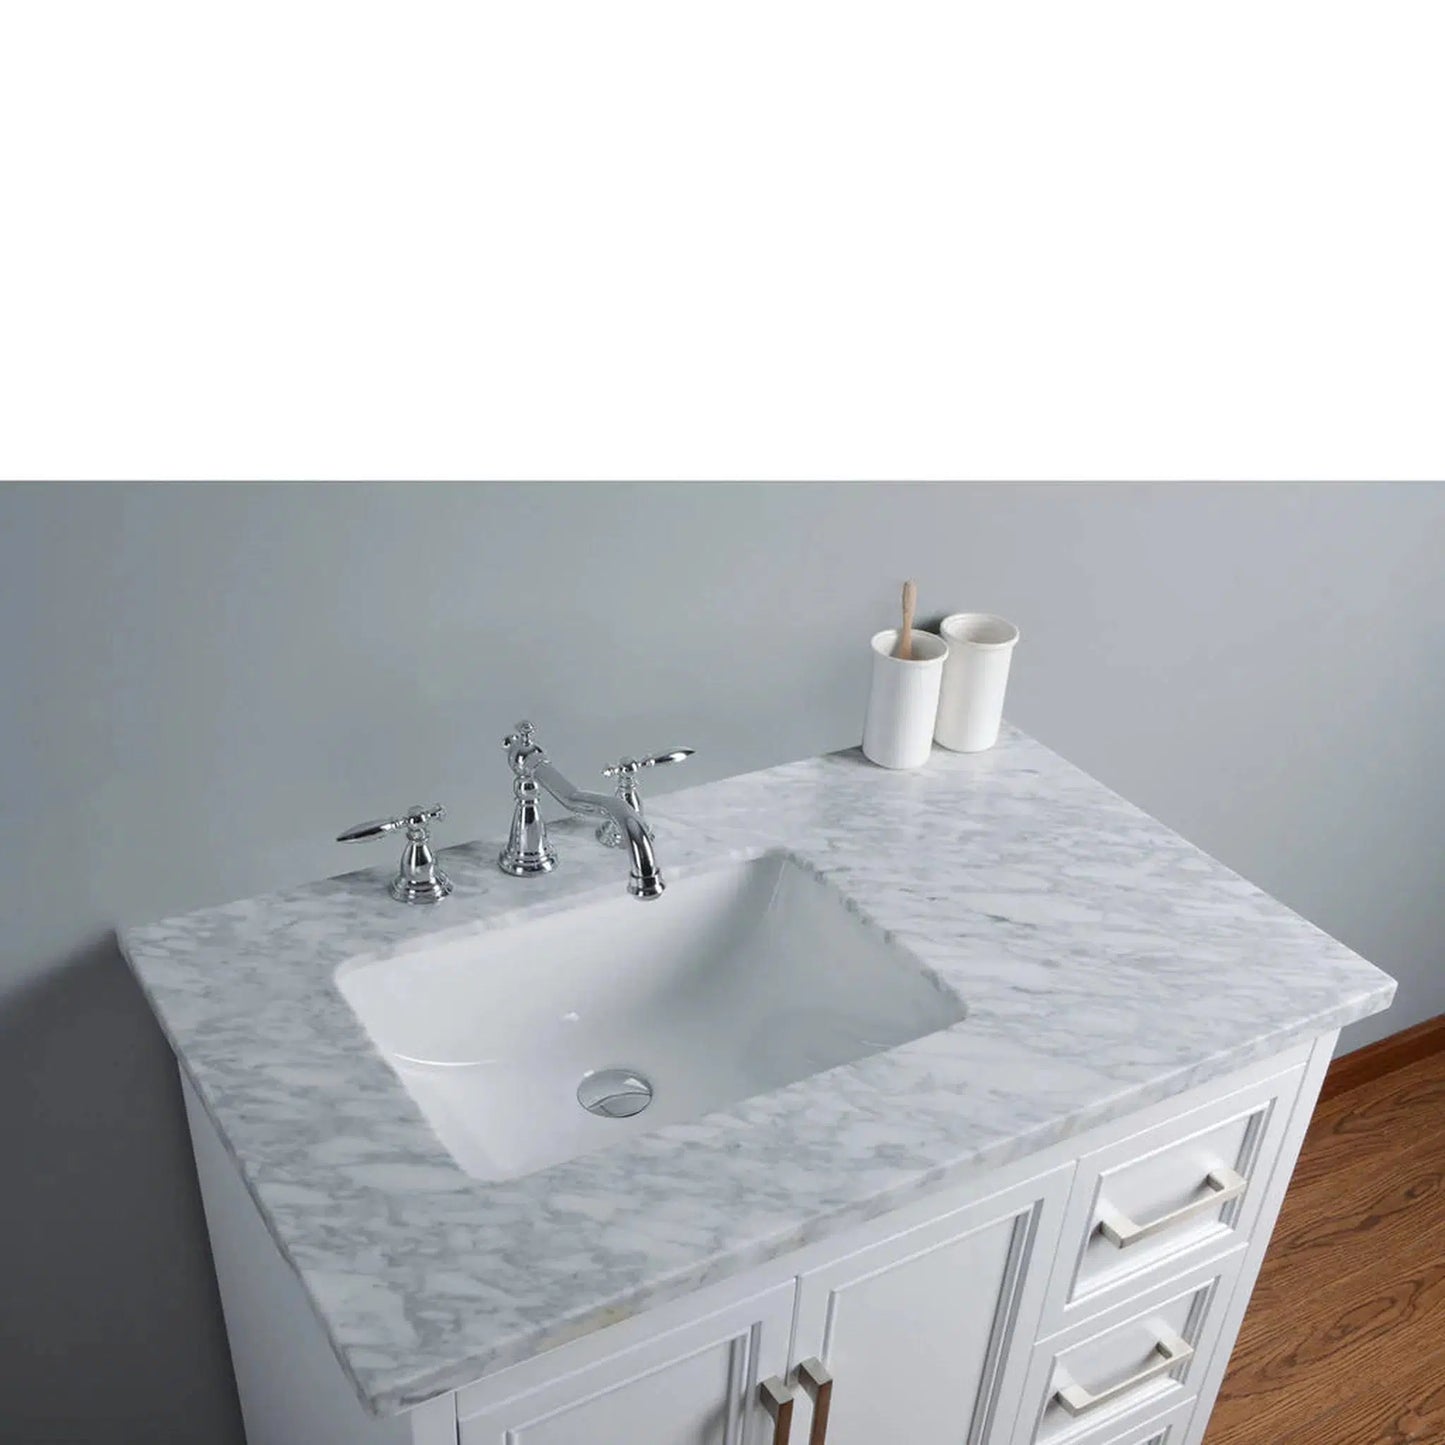 Stufurhome Ariane 36" White Marble Countertop Vanity Cabinet With Single Sink, 3 Drawers, 2 Doors and Widespread Faucet Holes